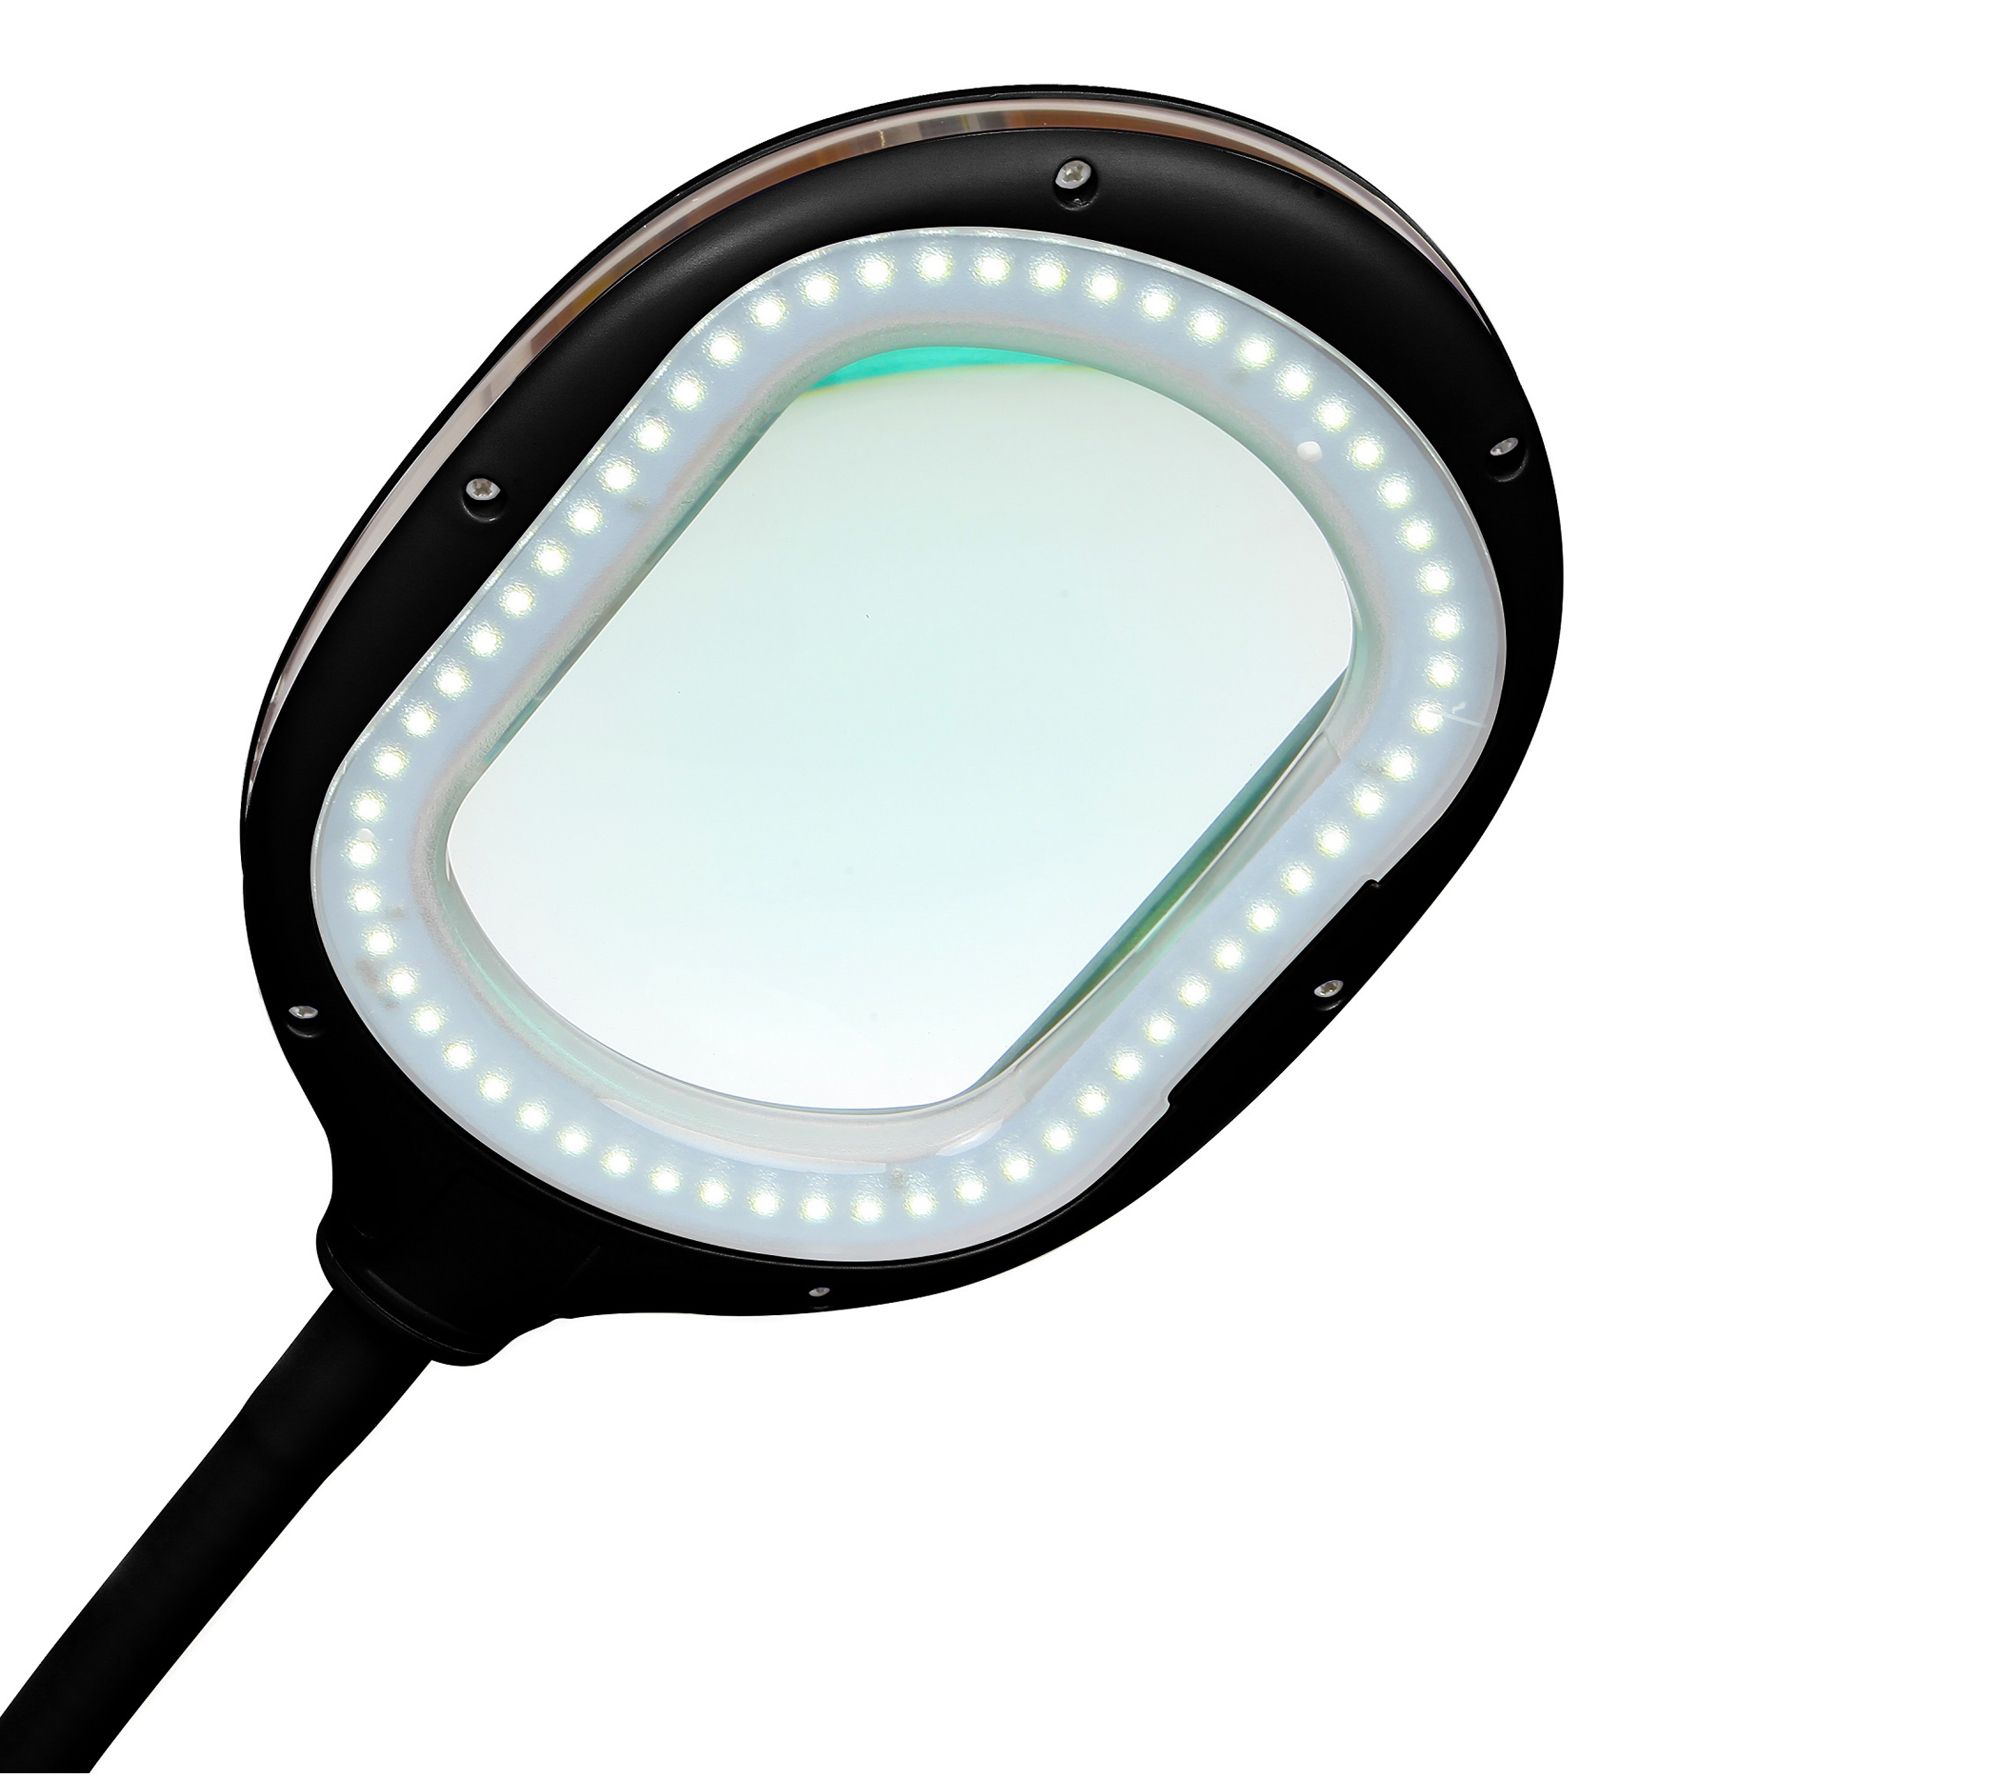 Brightech LightView Pro 2 in 1 Magnifying Floor Lamp & Table Lamp - Hands  Free Magnifier with Bright LED Light for Reading - Work Light with